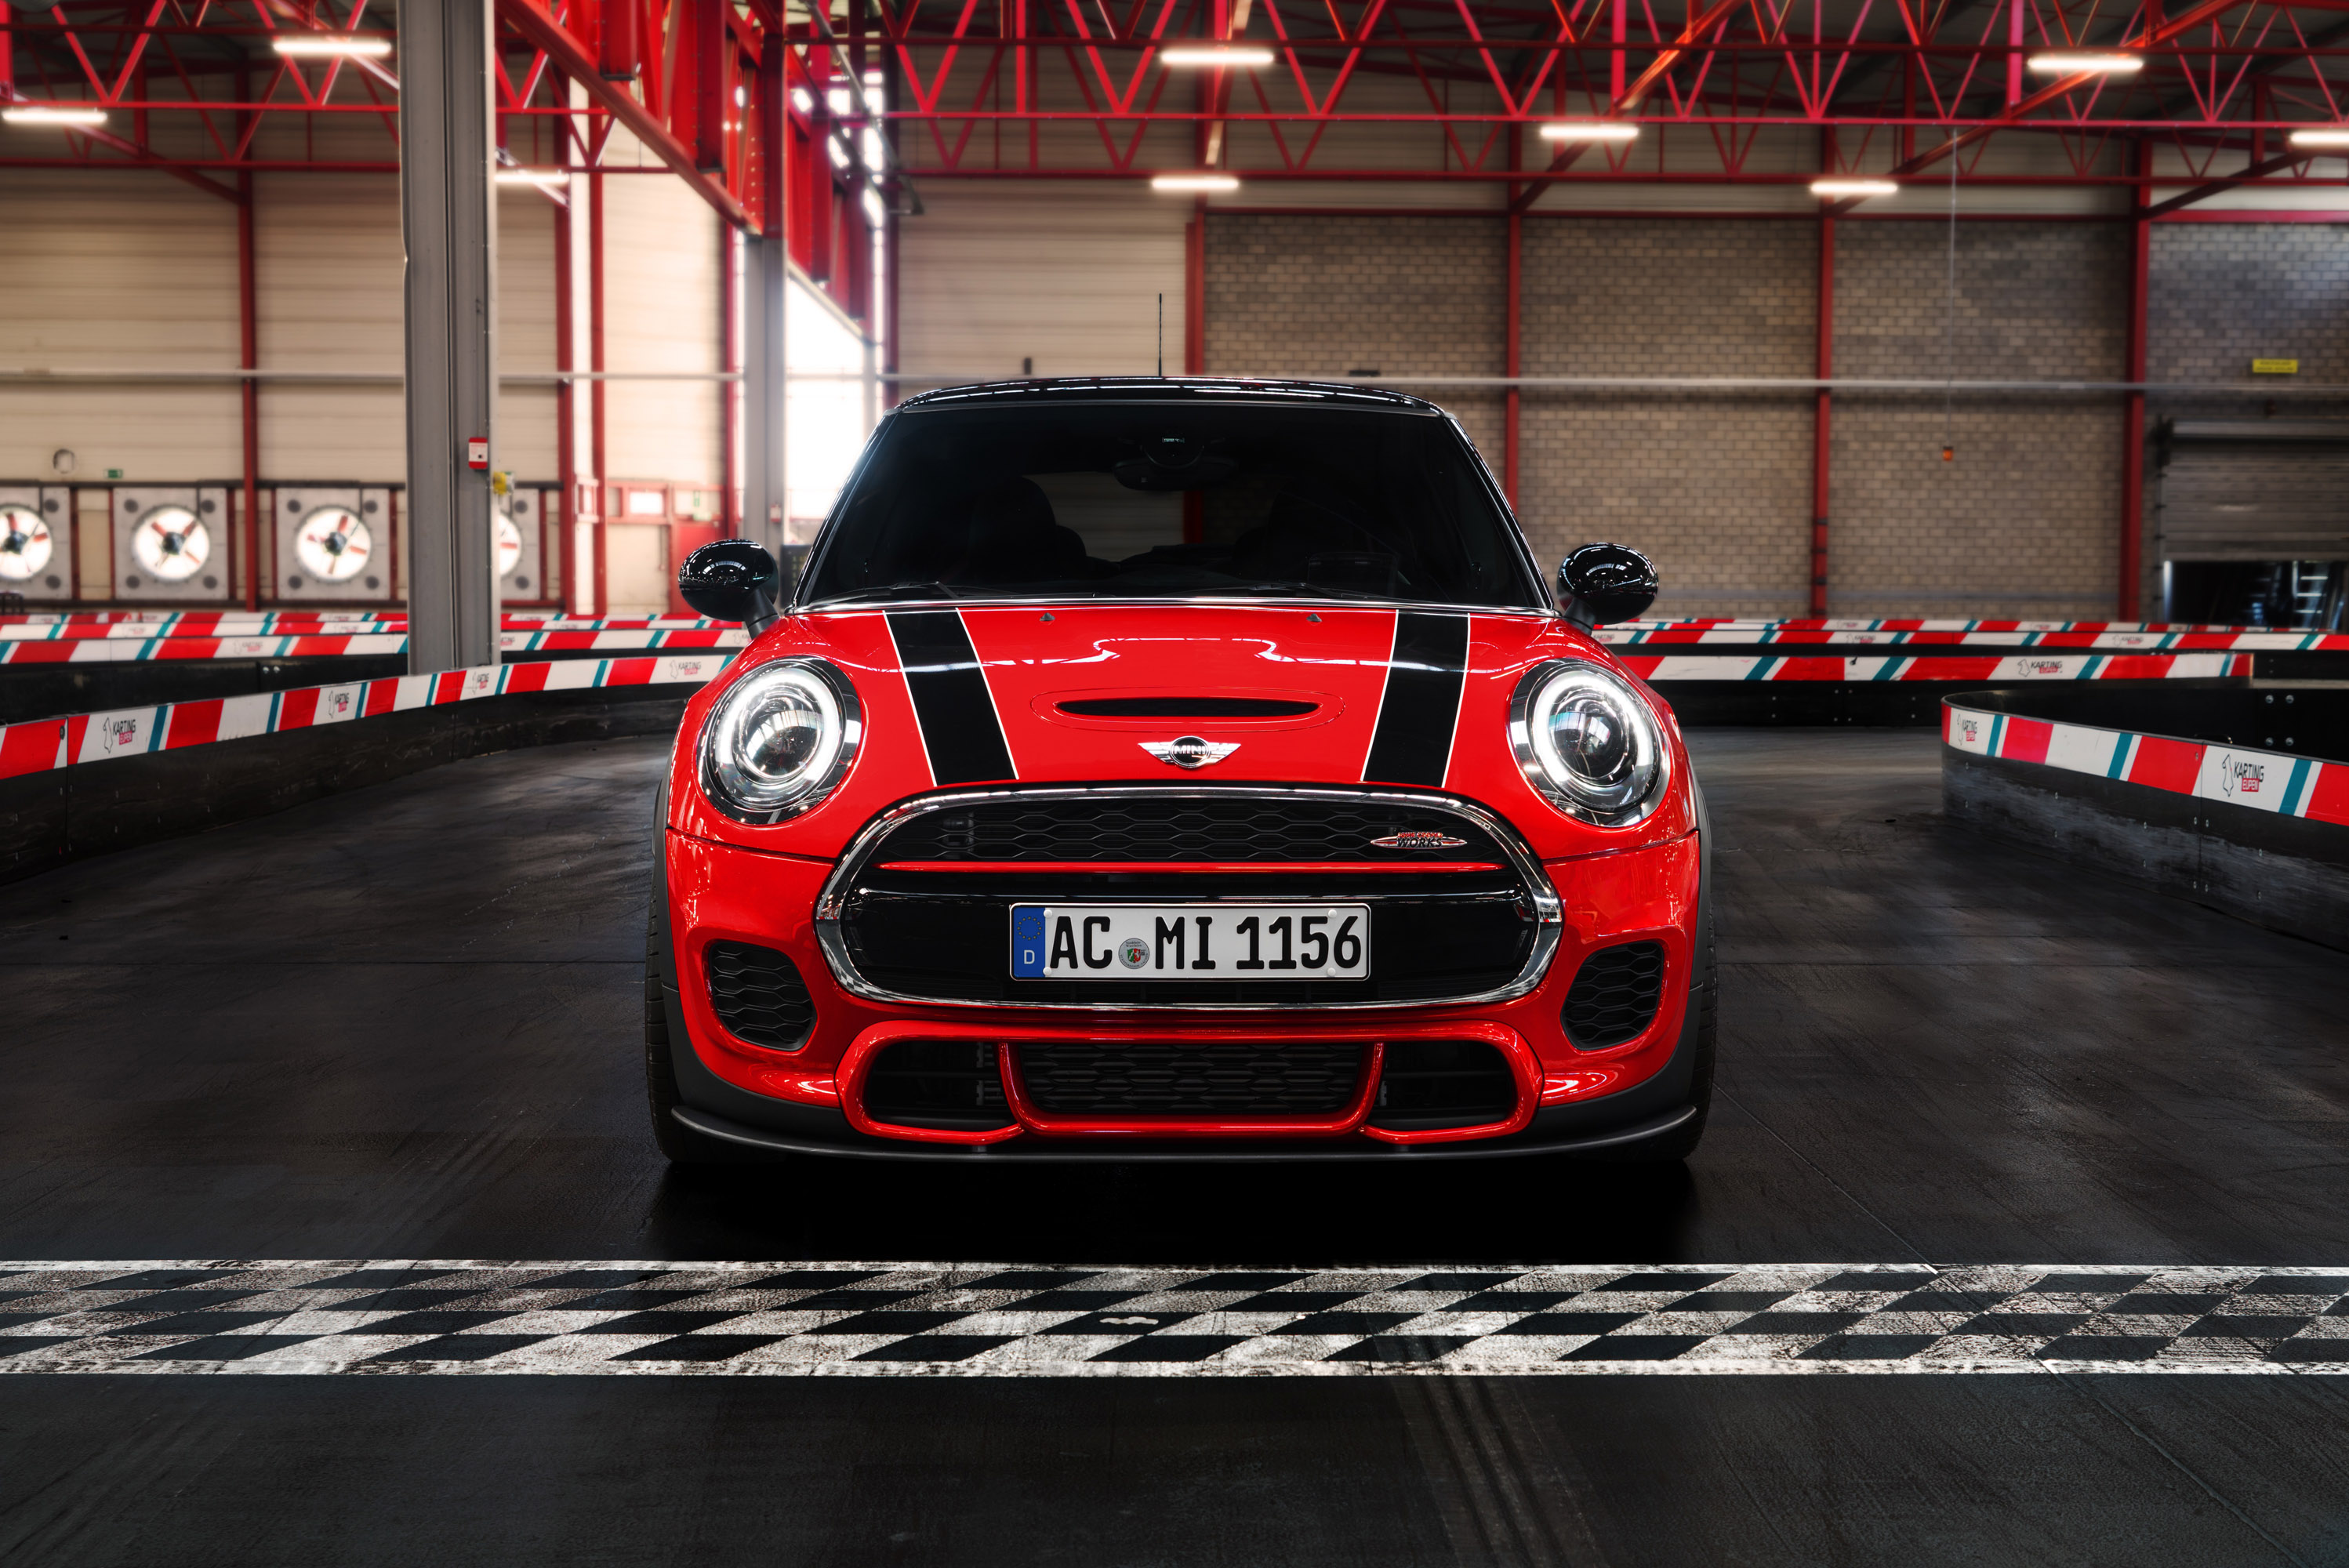 Essen Motor Show Welcomes the Stronger MINI JCW by AC Schnitzer